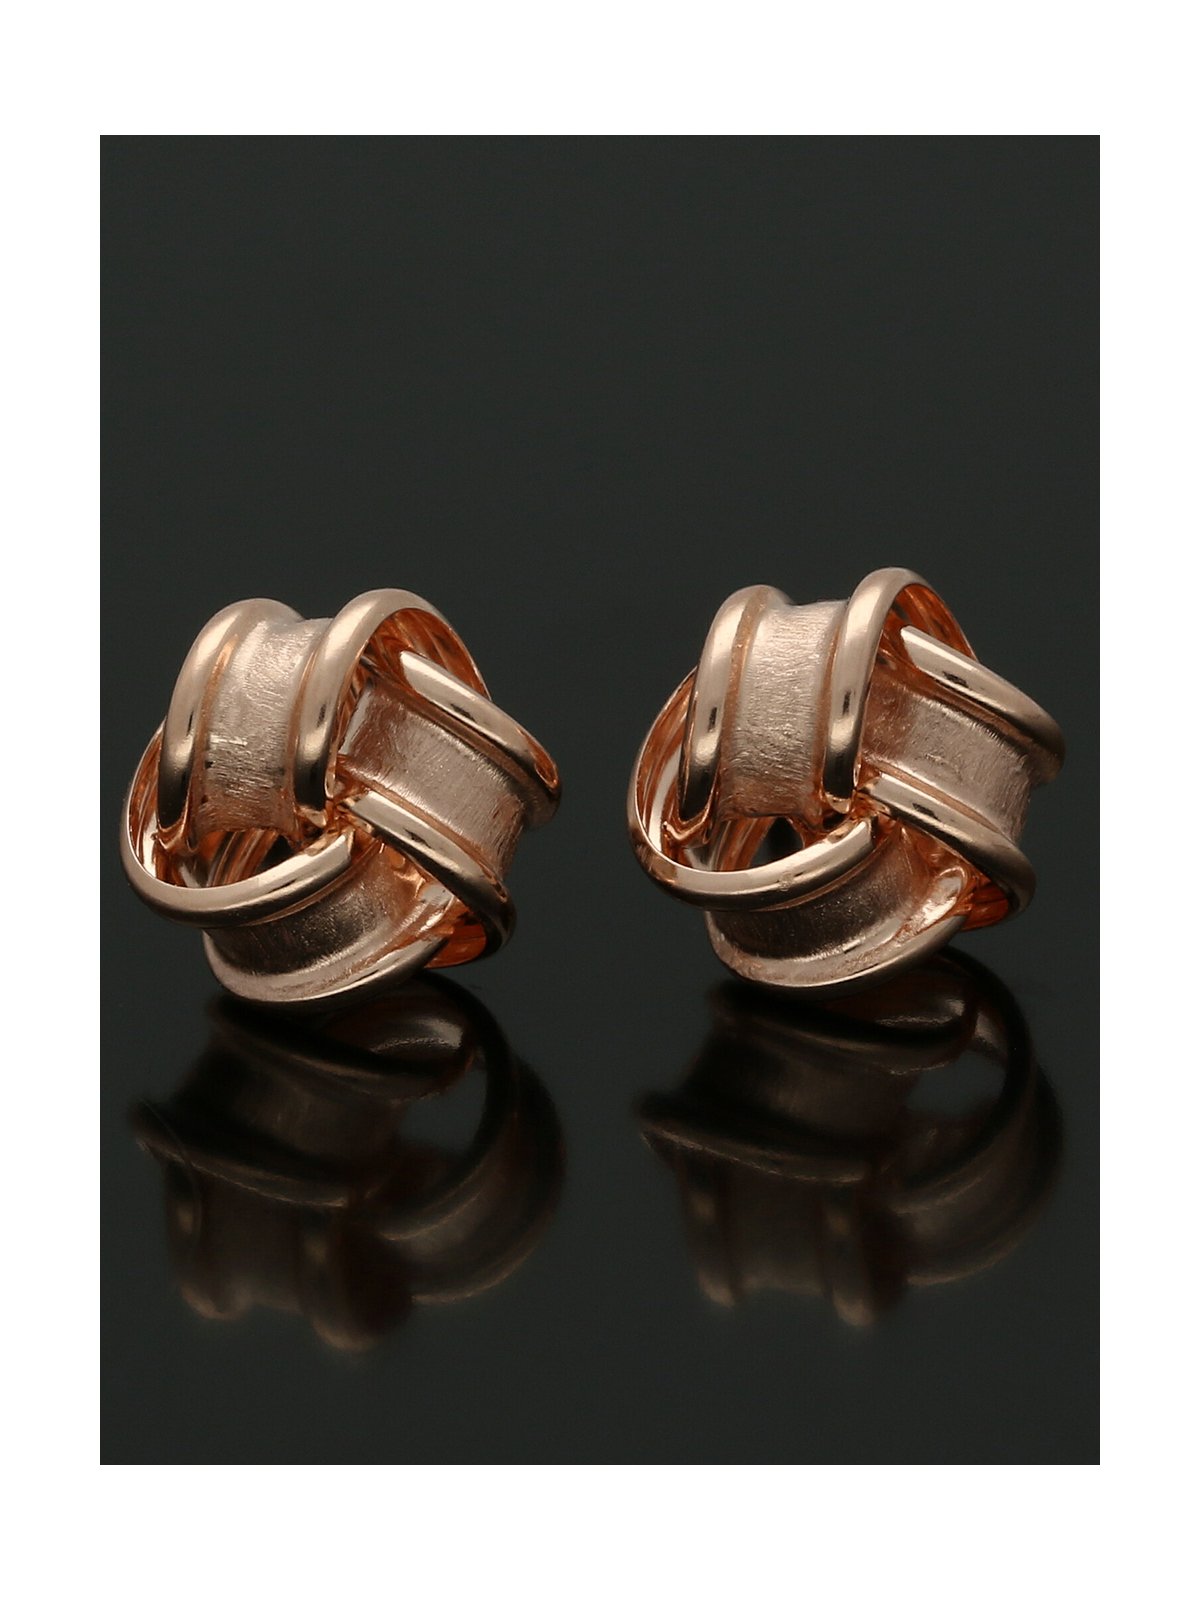 Frosted Ribbon Knot Stud Earrings 7.5mm in 9ct Rose Gold